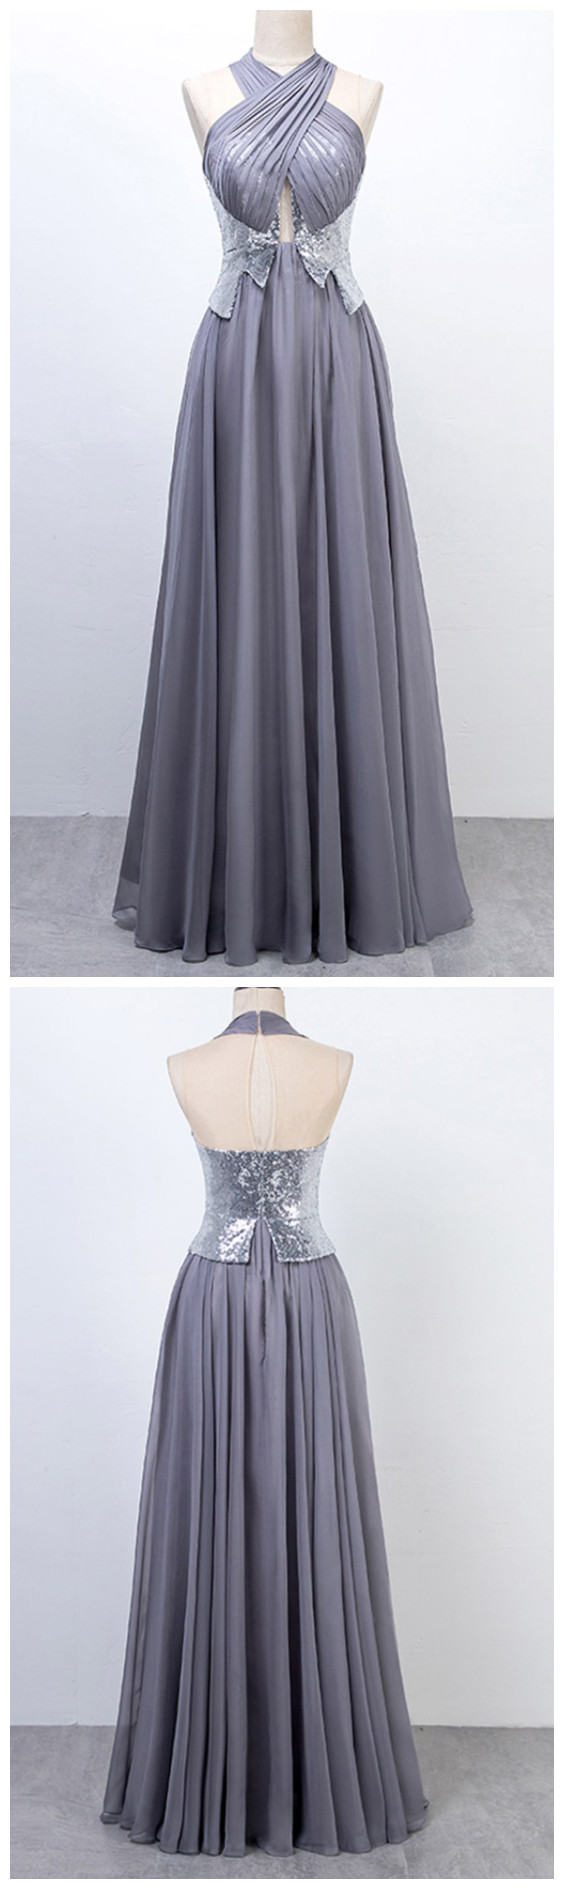 Ruby Outfit Silver Long Prom Dresses Halter Sequins Chiffon Evening Party Gown